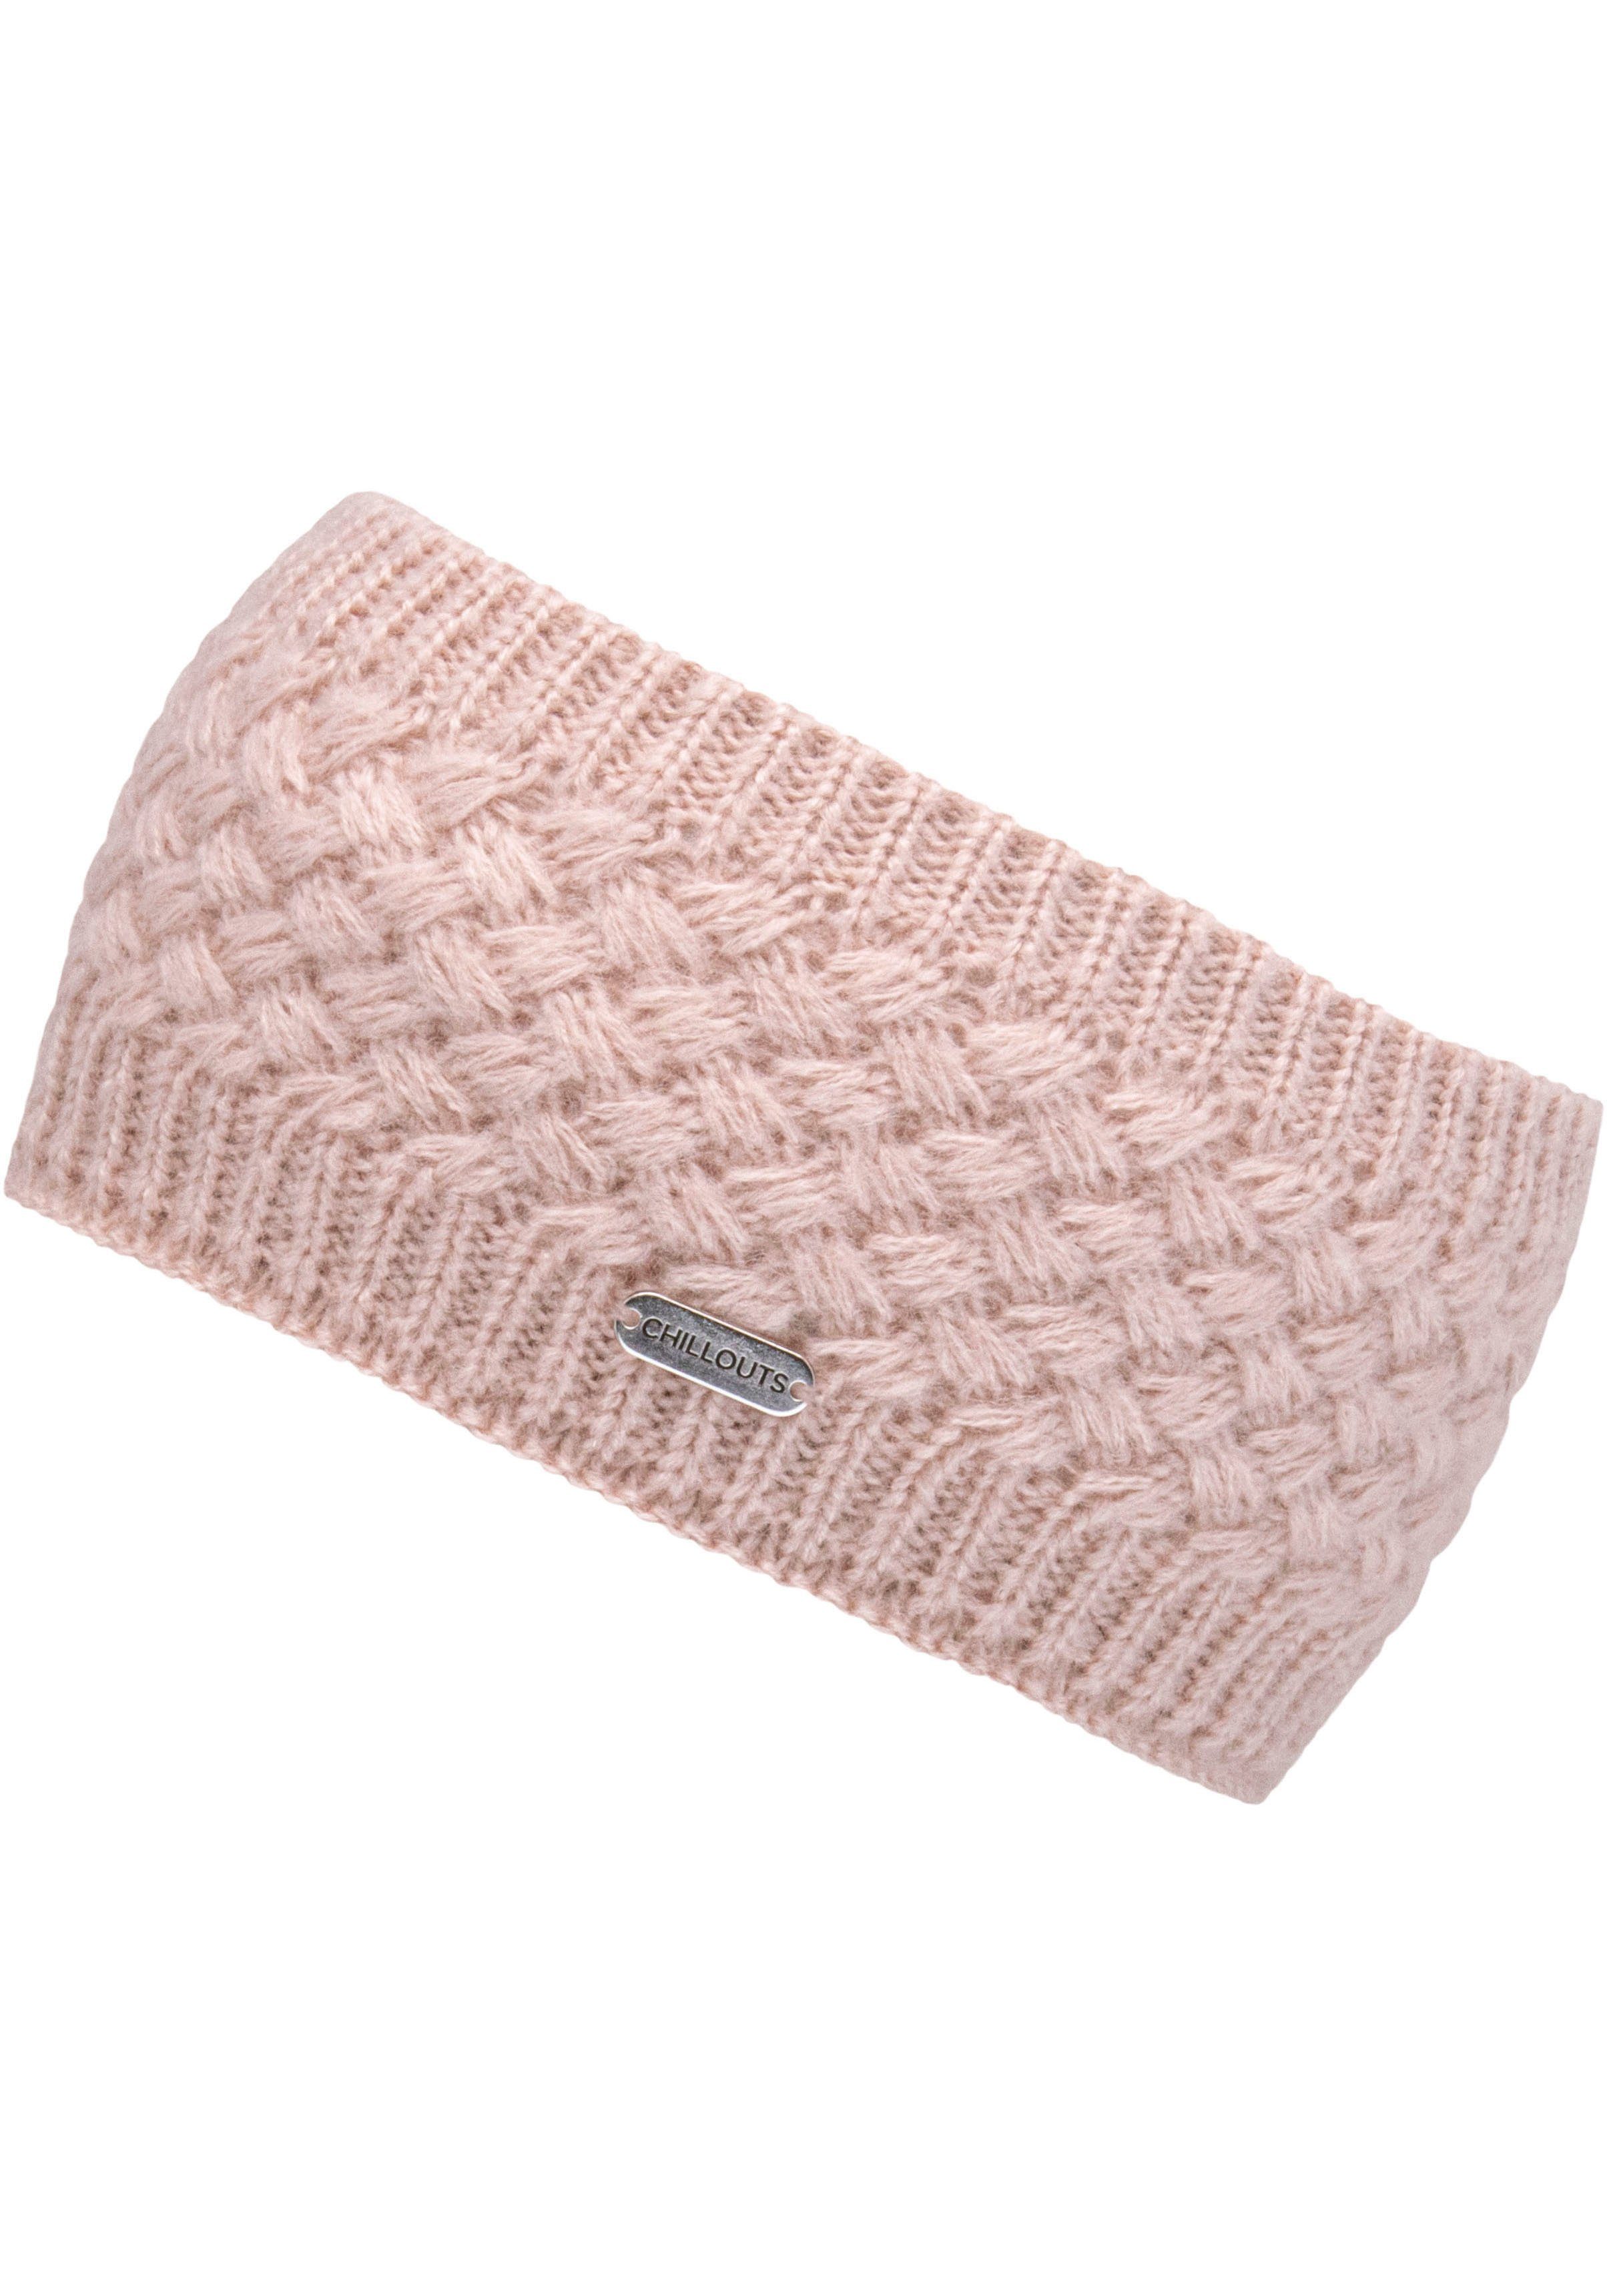 rose Metall-Label Felicitas Headband chillouts Stirnband